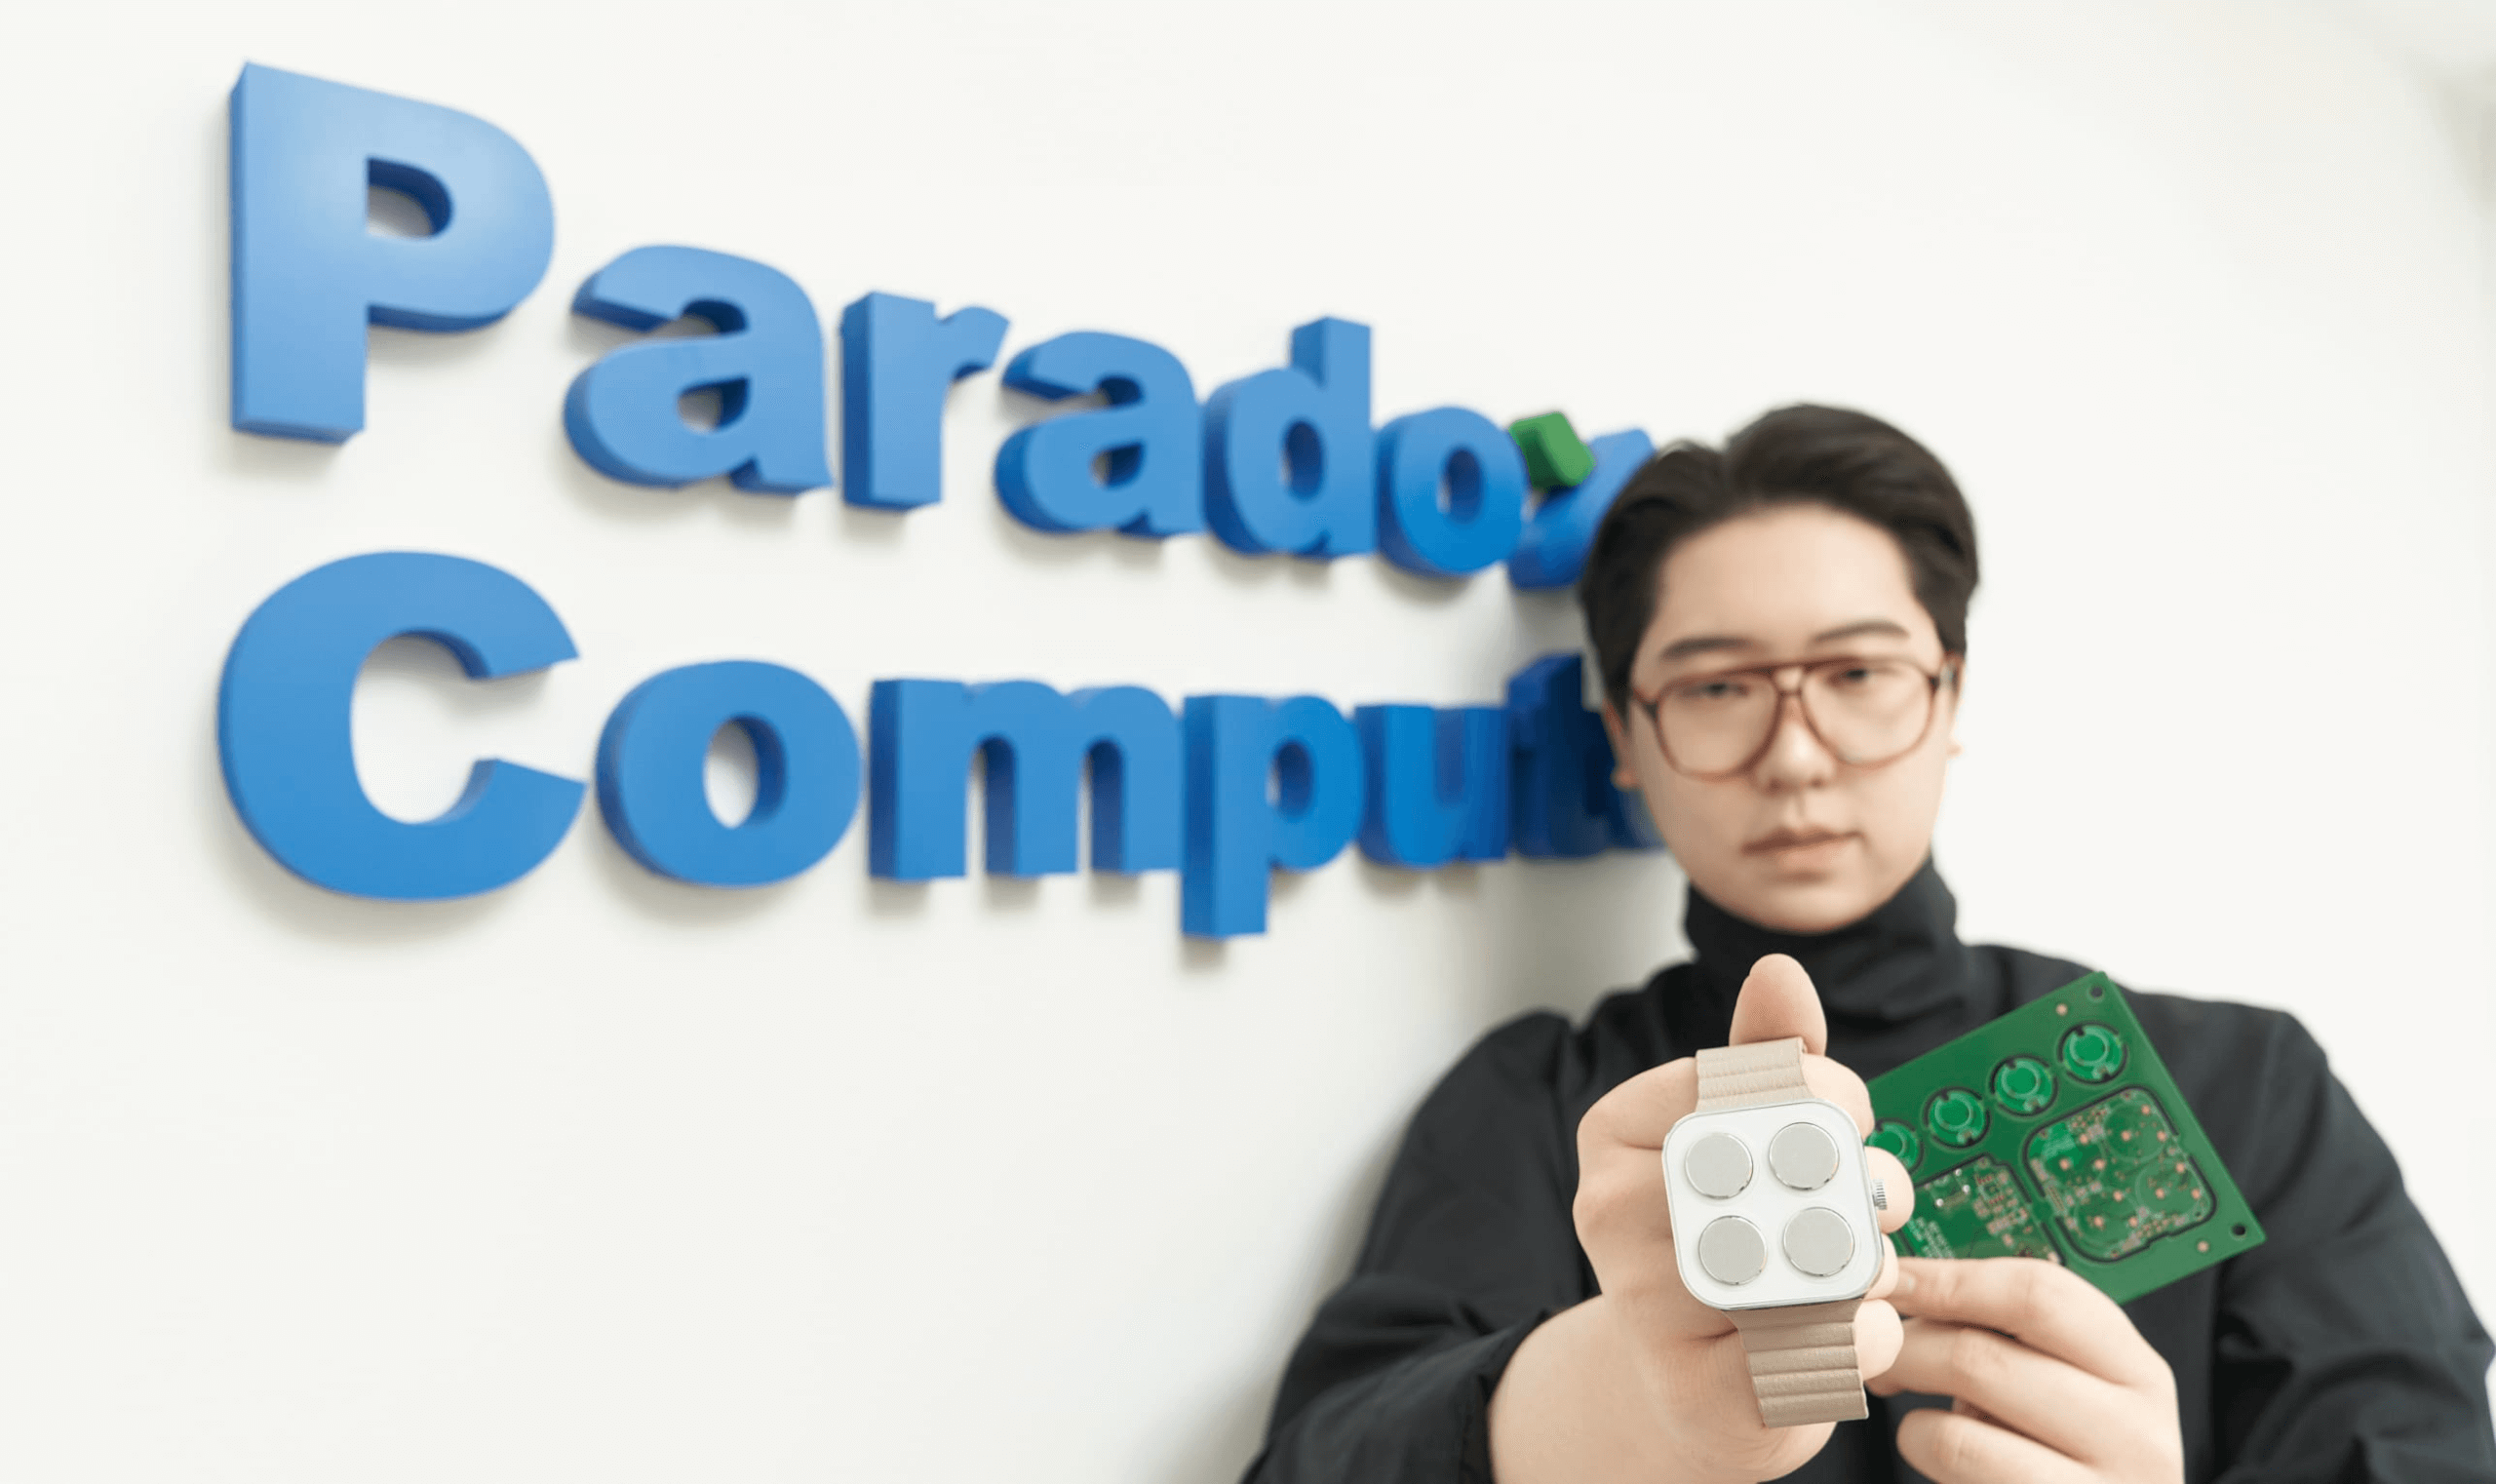 This 17-year-old Korean CEO made $1 million in sales this year. Now he’s onto his next venture